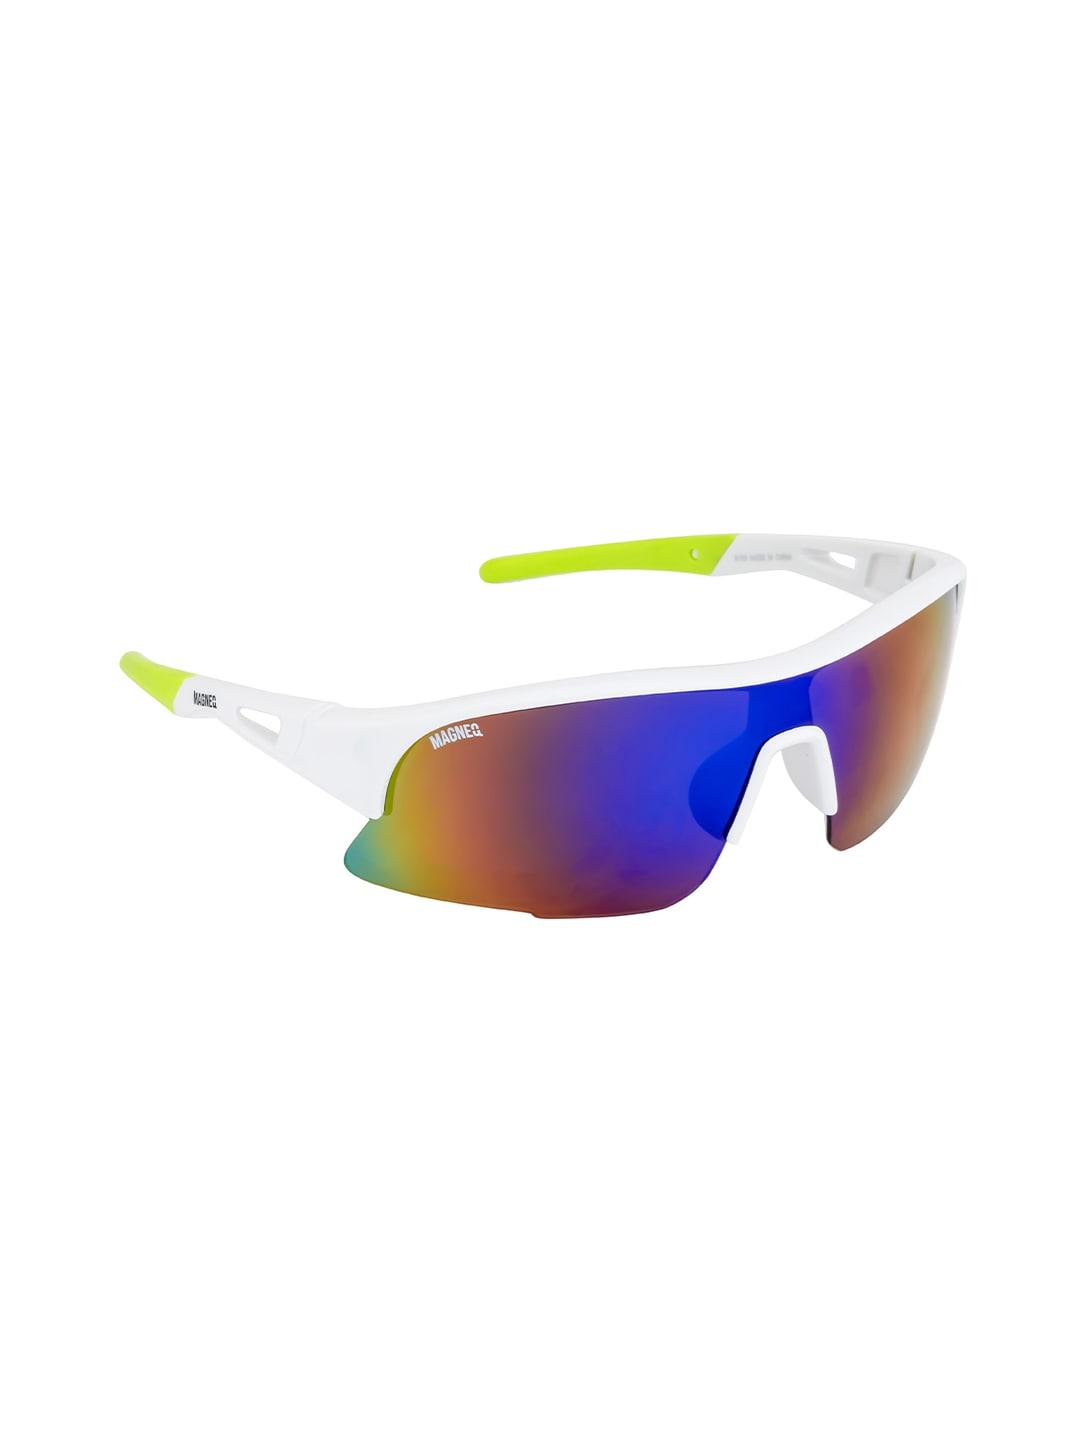 MAGNEQ Unisex Blue Lens & White Sports Sunglasses with UV Protected Lens